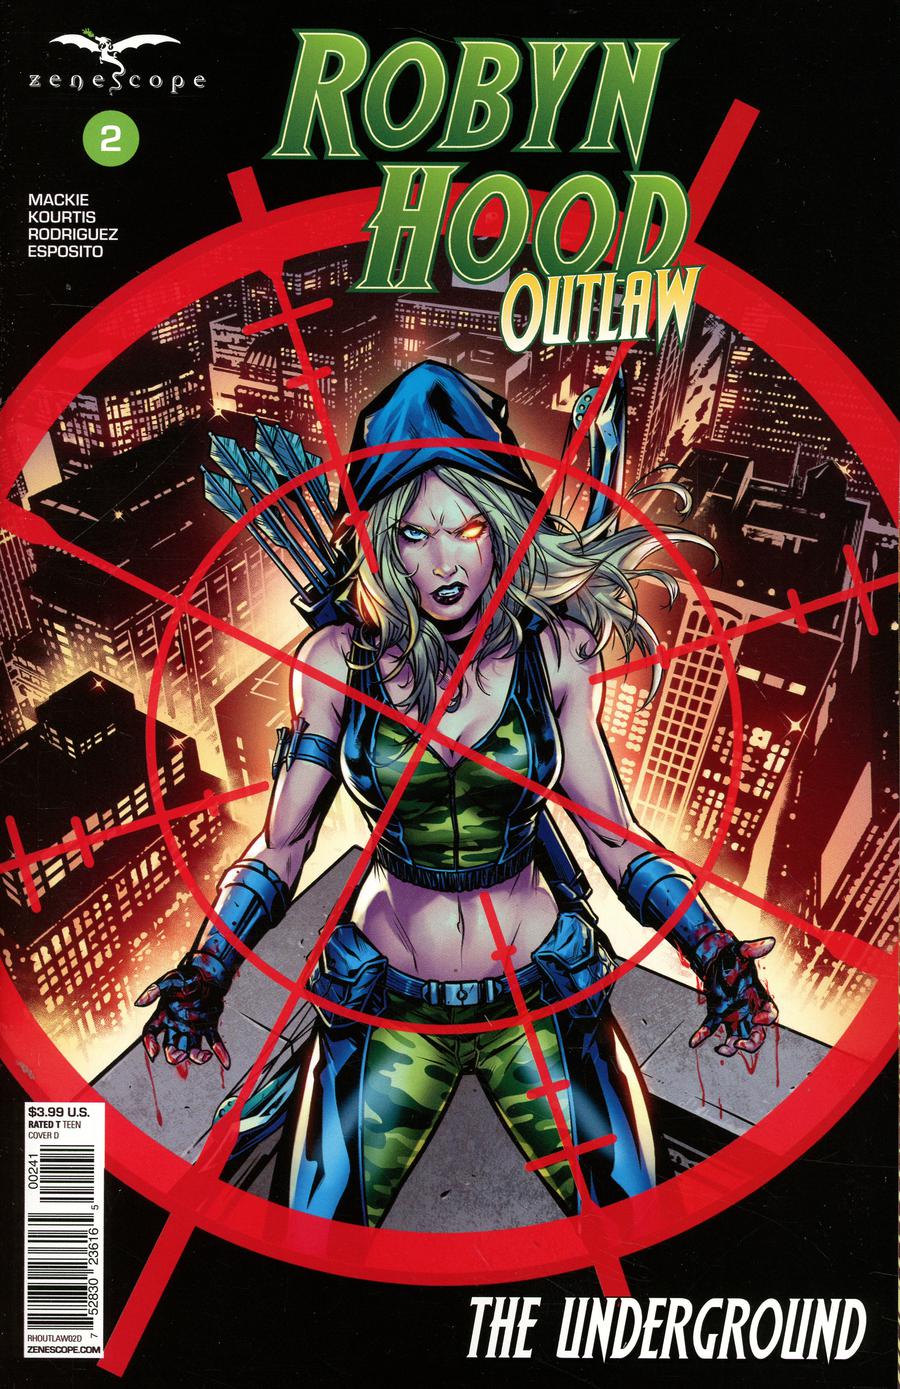 Grimm Fairy Tales Presents Robyn Hood Outlaw #2 Cover D Riveiro